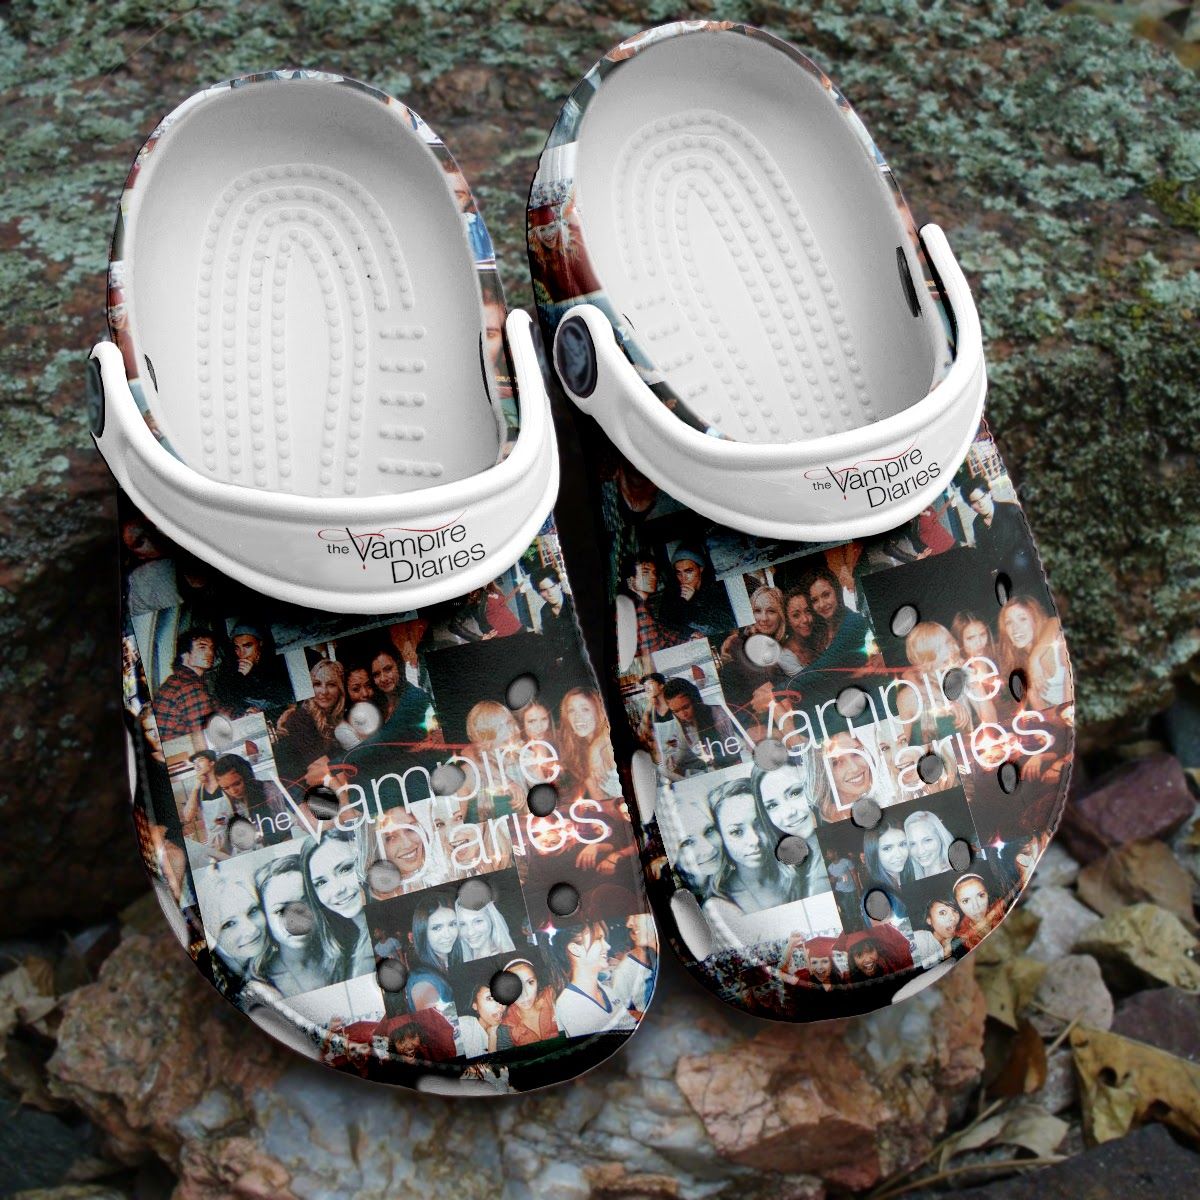 If you'd like to purchase a pair of Crocband Clogs, be sure to check out the official website. 173